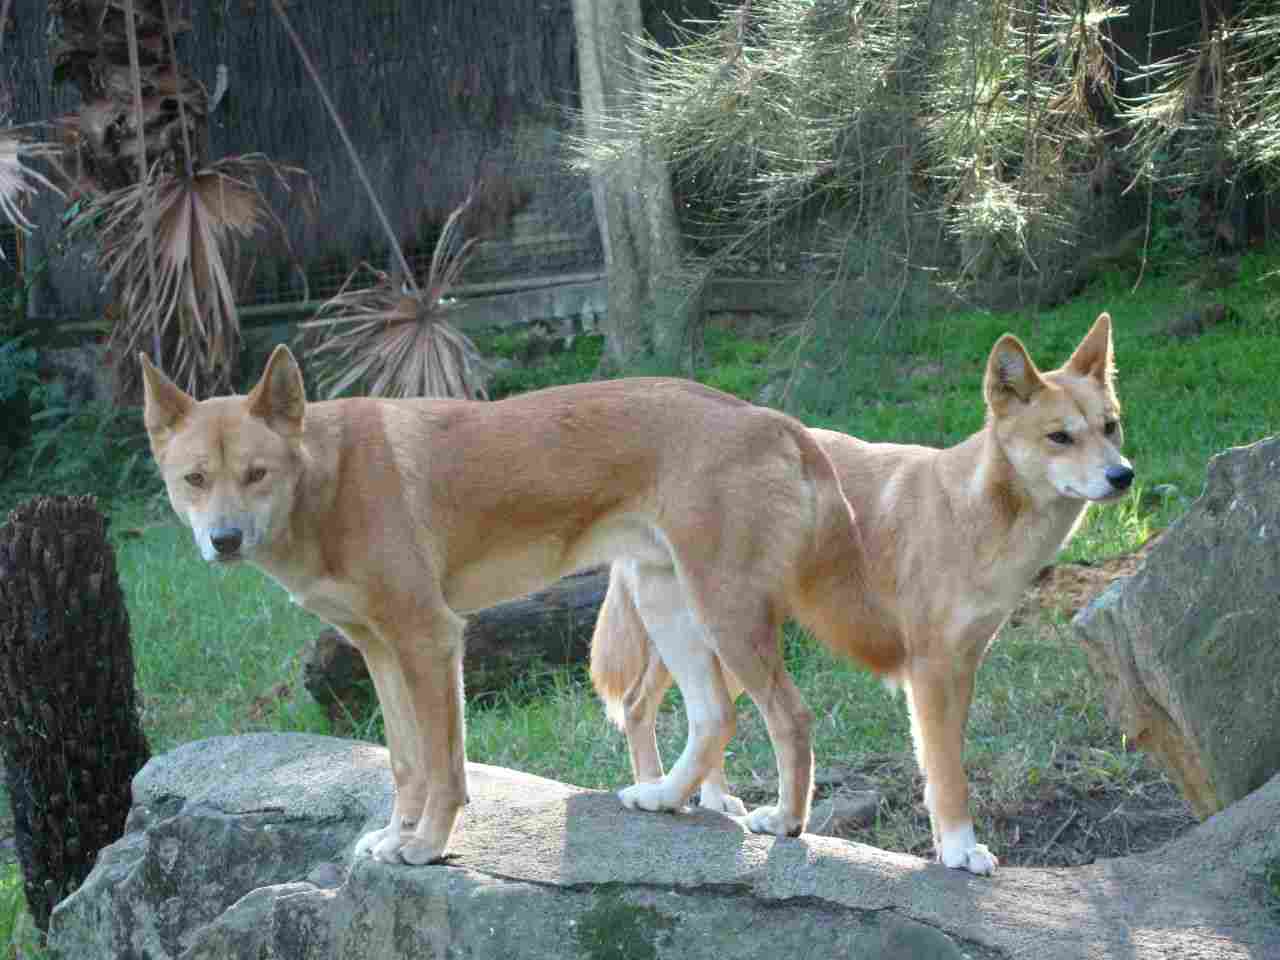 Hyena Vs Dingo: Distinction in the Appearance of Hyenas and Dingoes Can be Used to Differentiate Them (Credit: Brian Giesen 2009 .CC BY 2.0.)